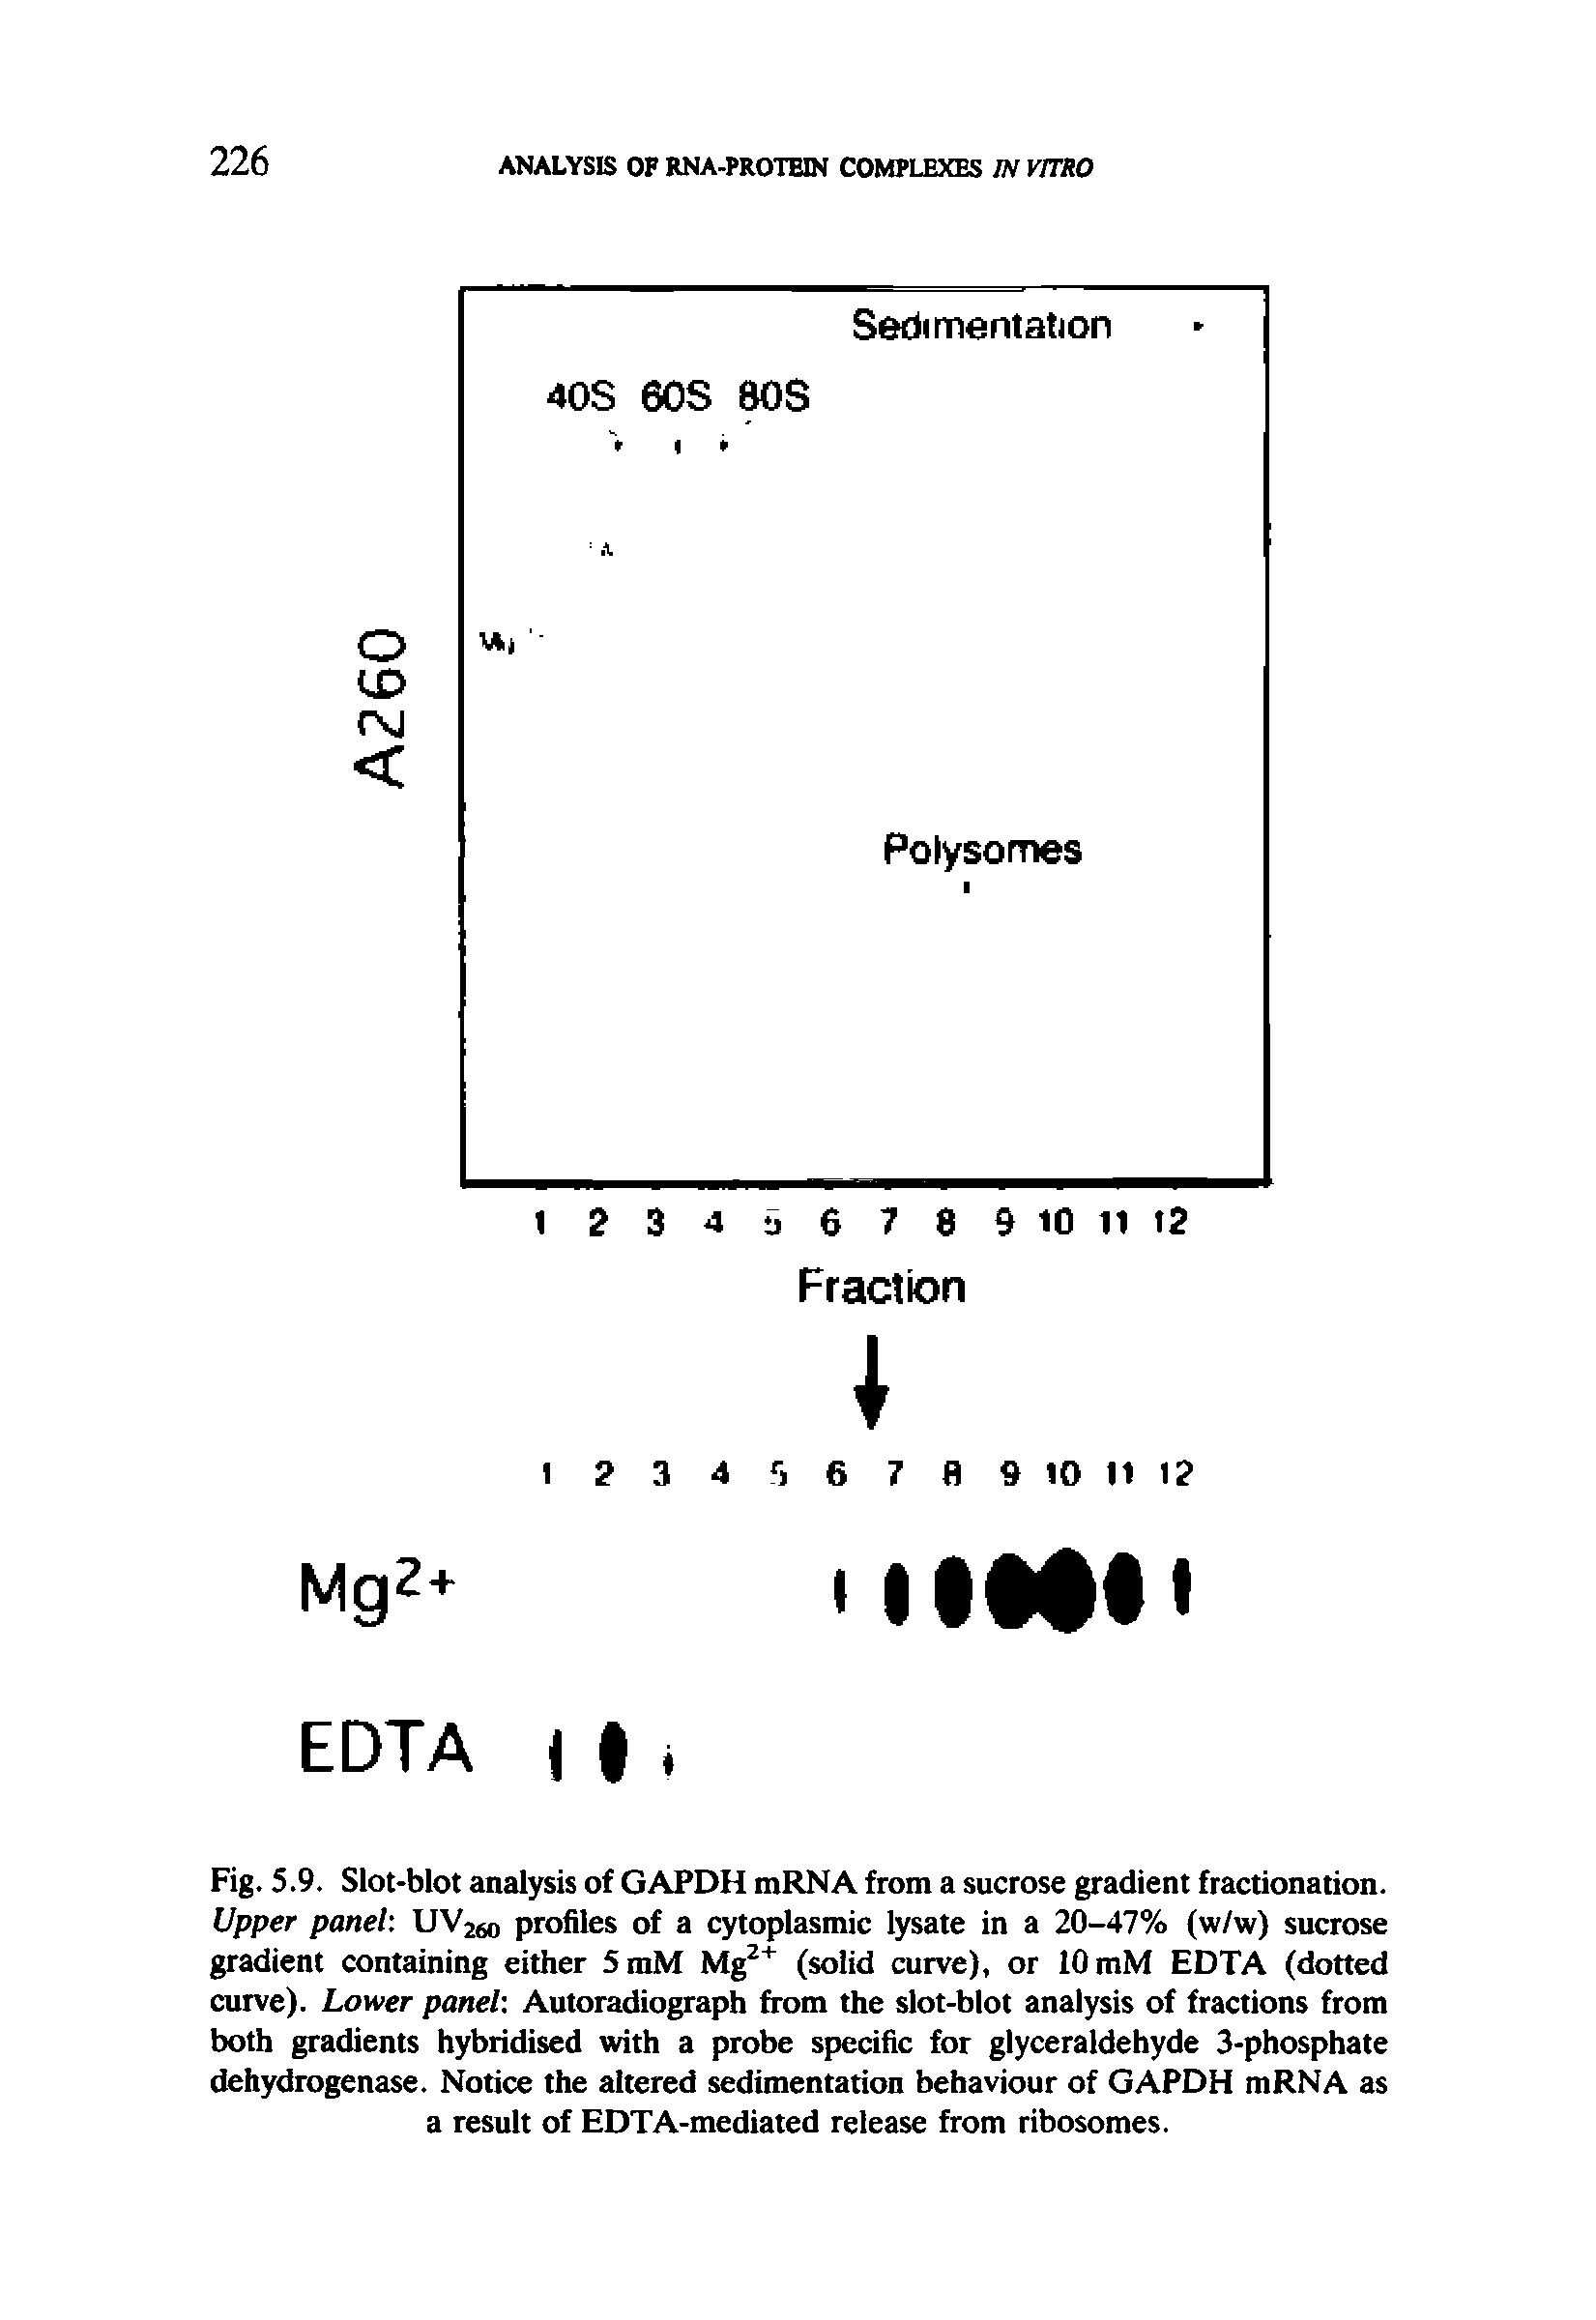 Fig. 5.9. Slot-blot analysis of GAPDH mRNA from a sucrose gradient fractionation. Upper panel UV26o profiles of a cytoplasmic lysate in a 20-47% (w/w) sucrose gradient containing either 5mM Mgz+ (solid curve), or 10 mM EDTA (dotted curve). Lower panel Autoradiograph from the slot-blot analysis of fractions from both gradients hybridised with a probe specific for glyceraldehyde 3-phosphate dehydrogenase. Notice the altered sedimentation behaviour of GAPDH mRNA as a result of EDTA-mediated release from ribosomes.